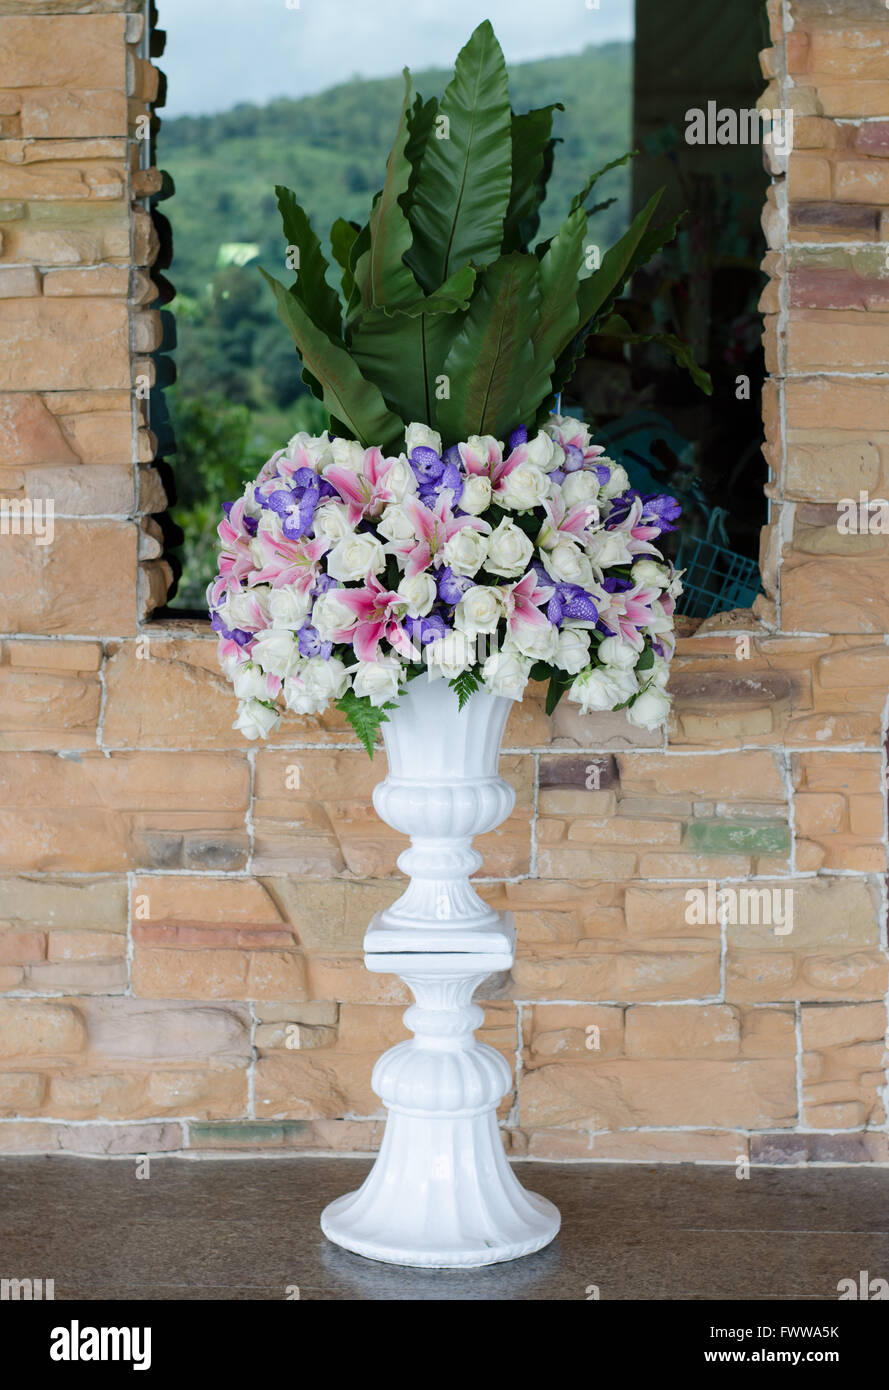 Bunch of flowers in a big decorative vase Stock Photo